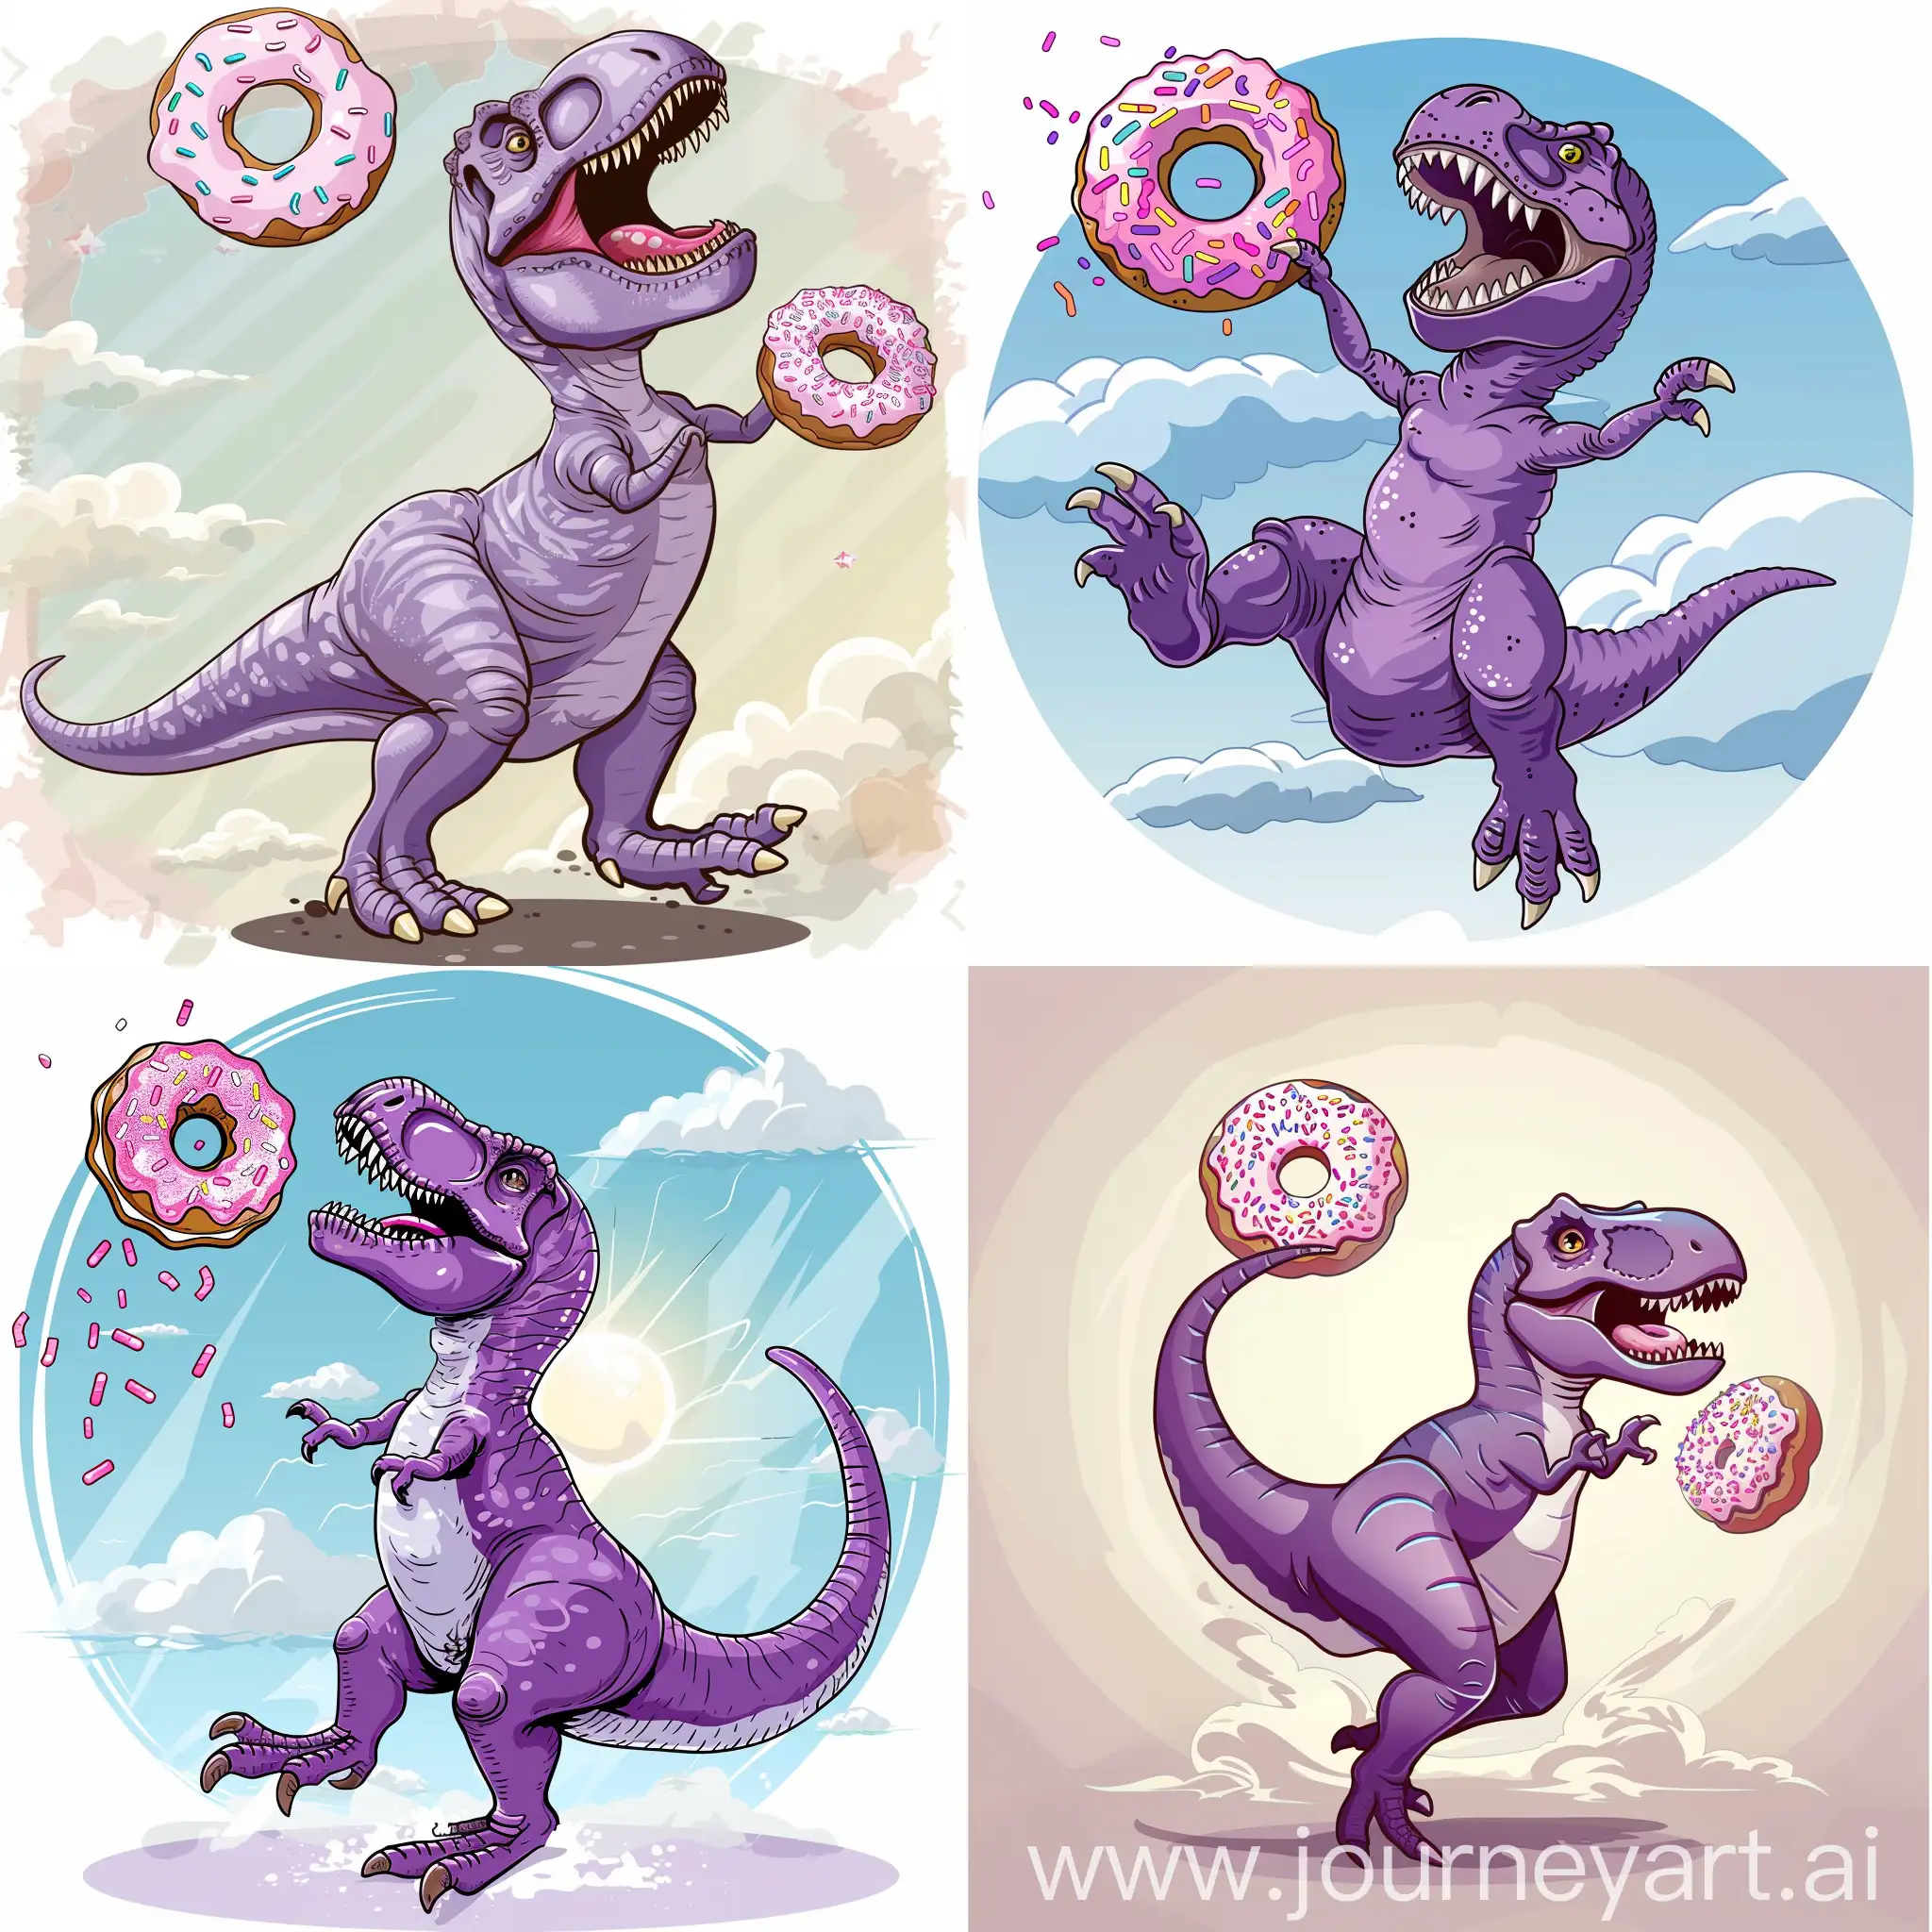 Cartoon of Little purple T-rex roaring into the air holding a pink sprinkle covered donut